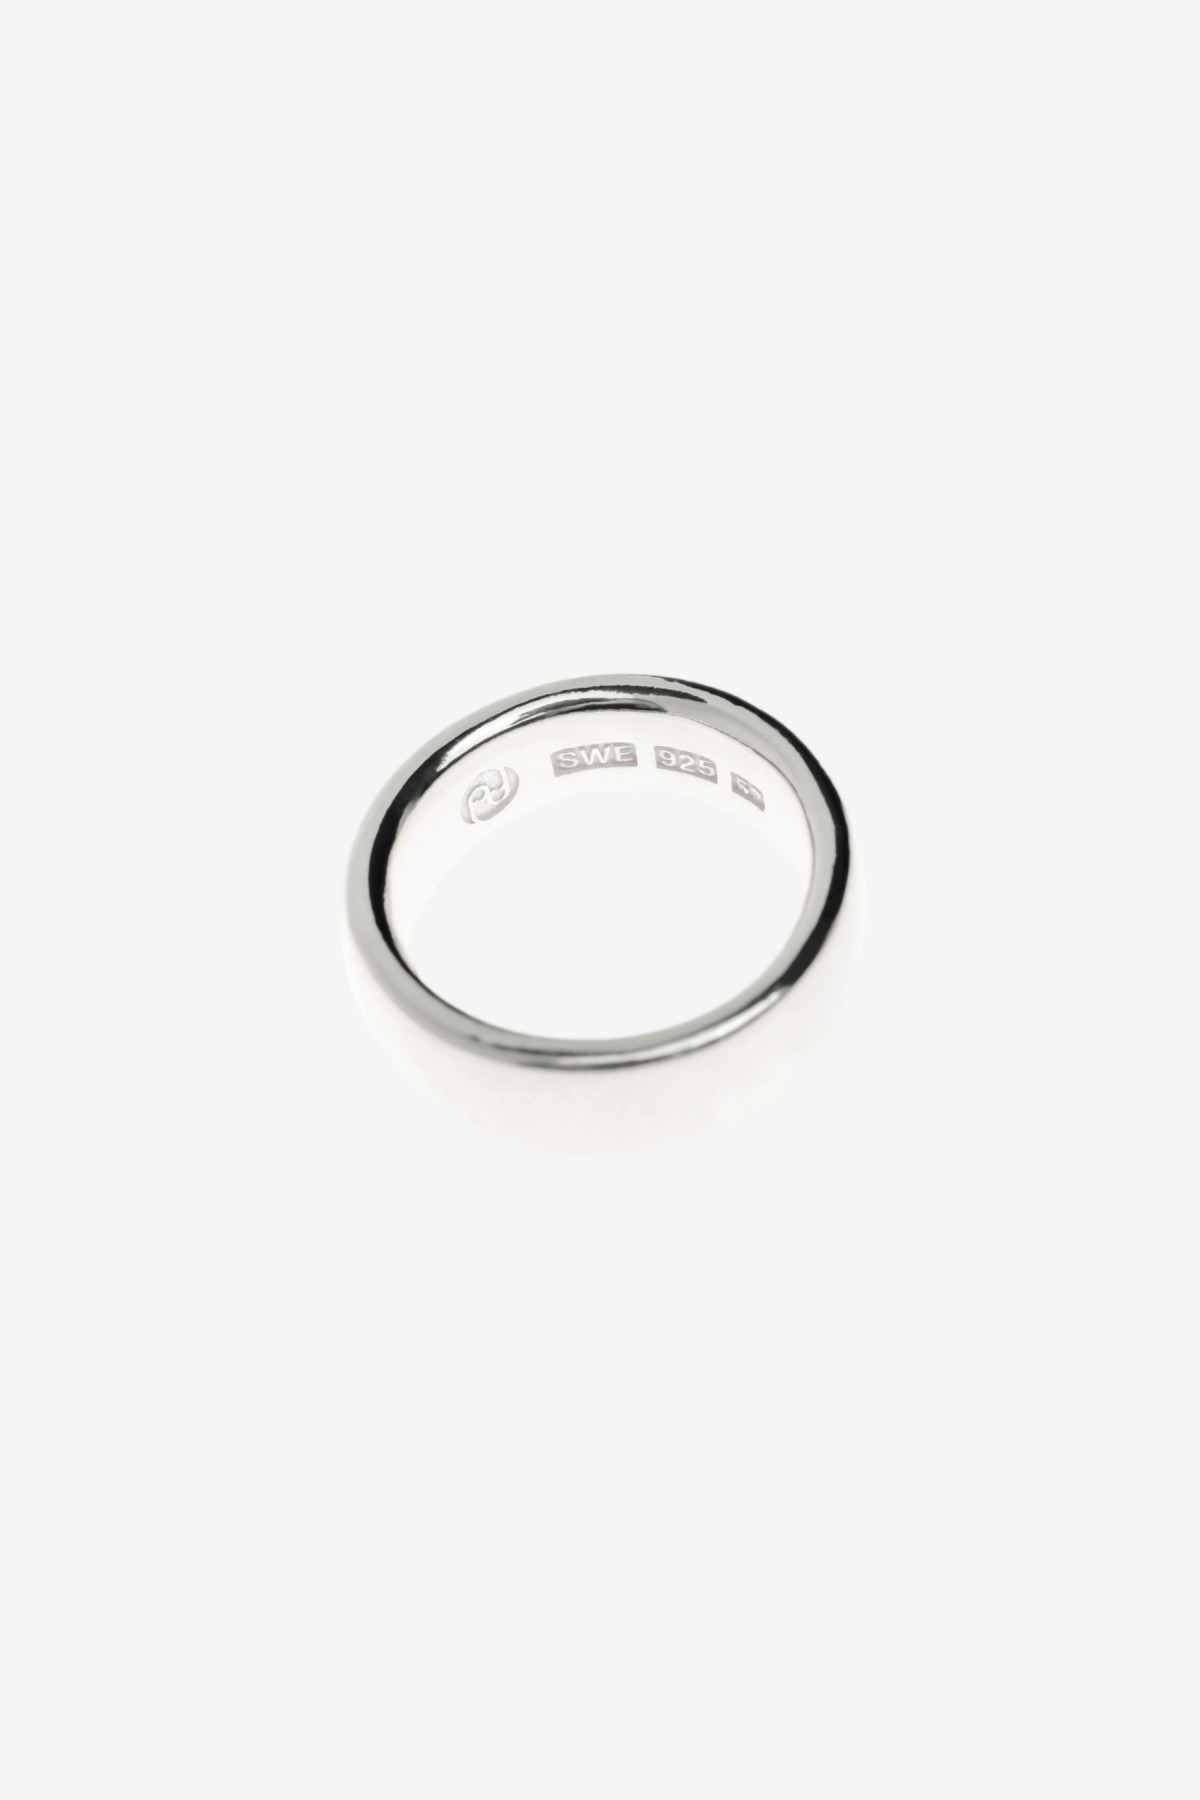 All Blues Tire Ring Narrow in Polished Silver